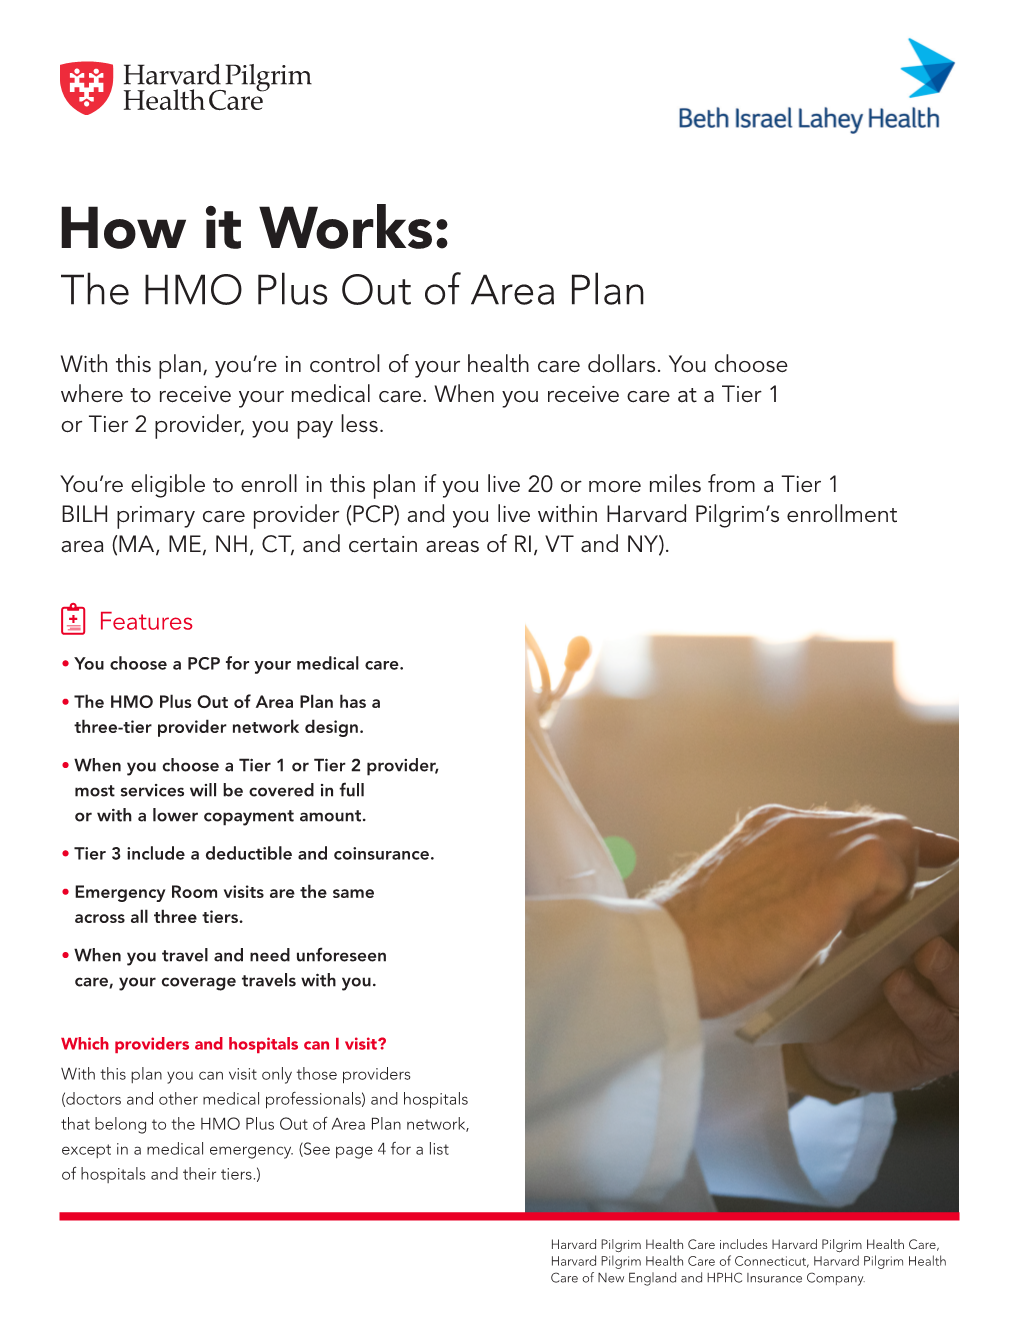 How It Works: the HMO Plus out of Area Plan